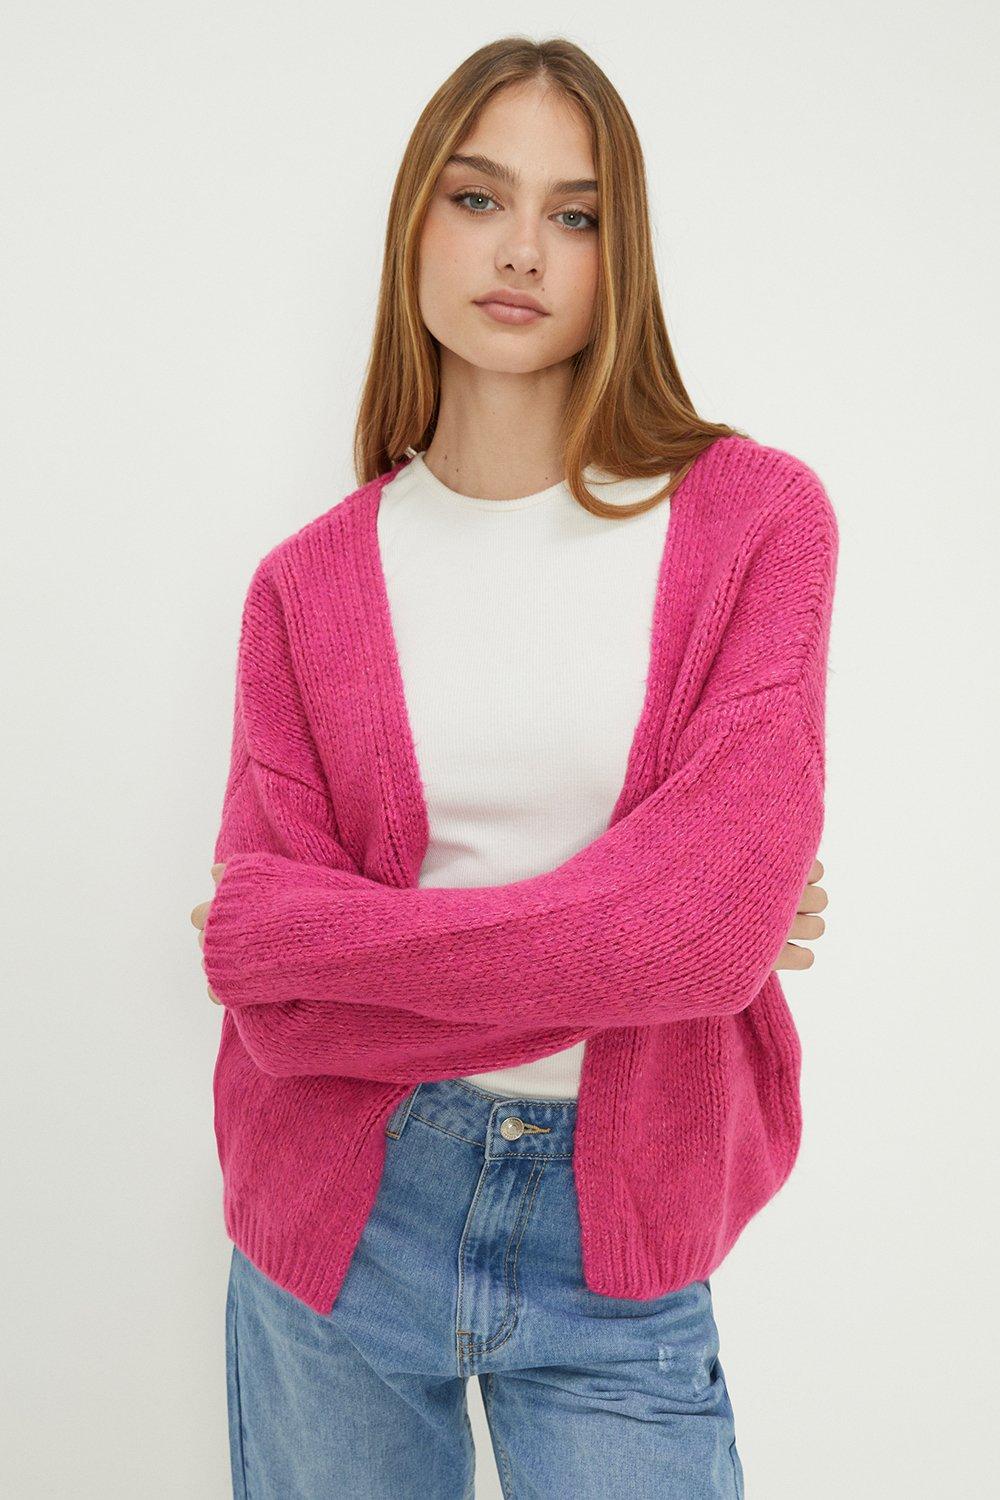 Women's Chunky Knit Oversized Batwing Cardigan - pink - M/L product